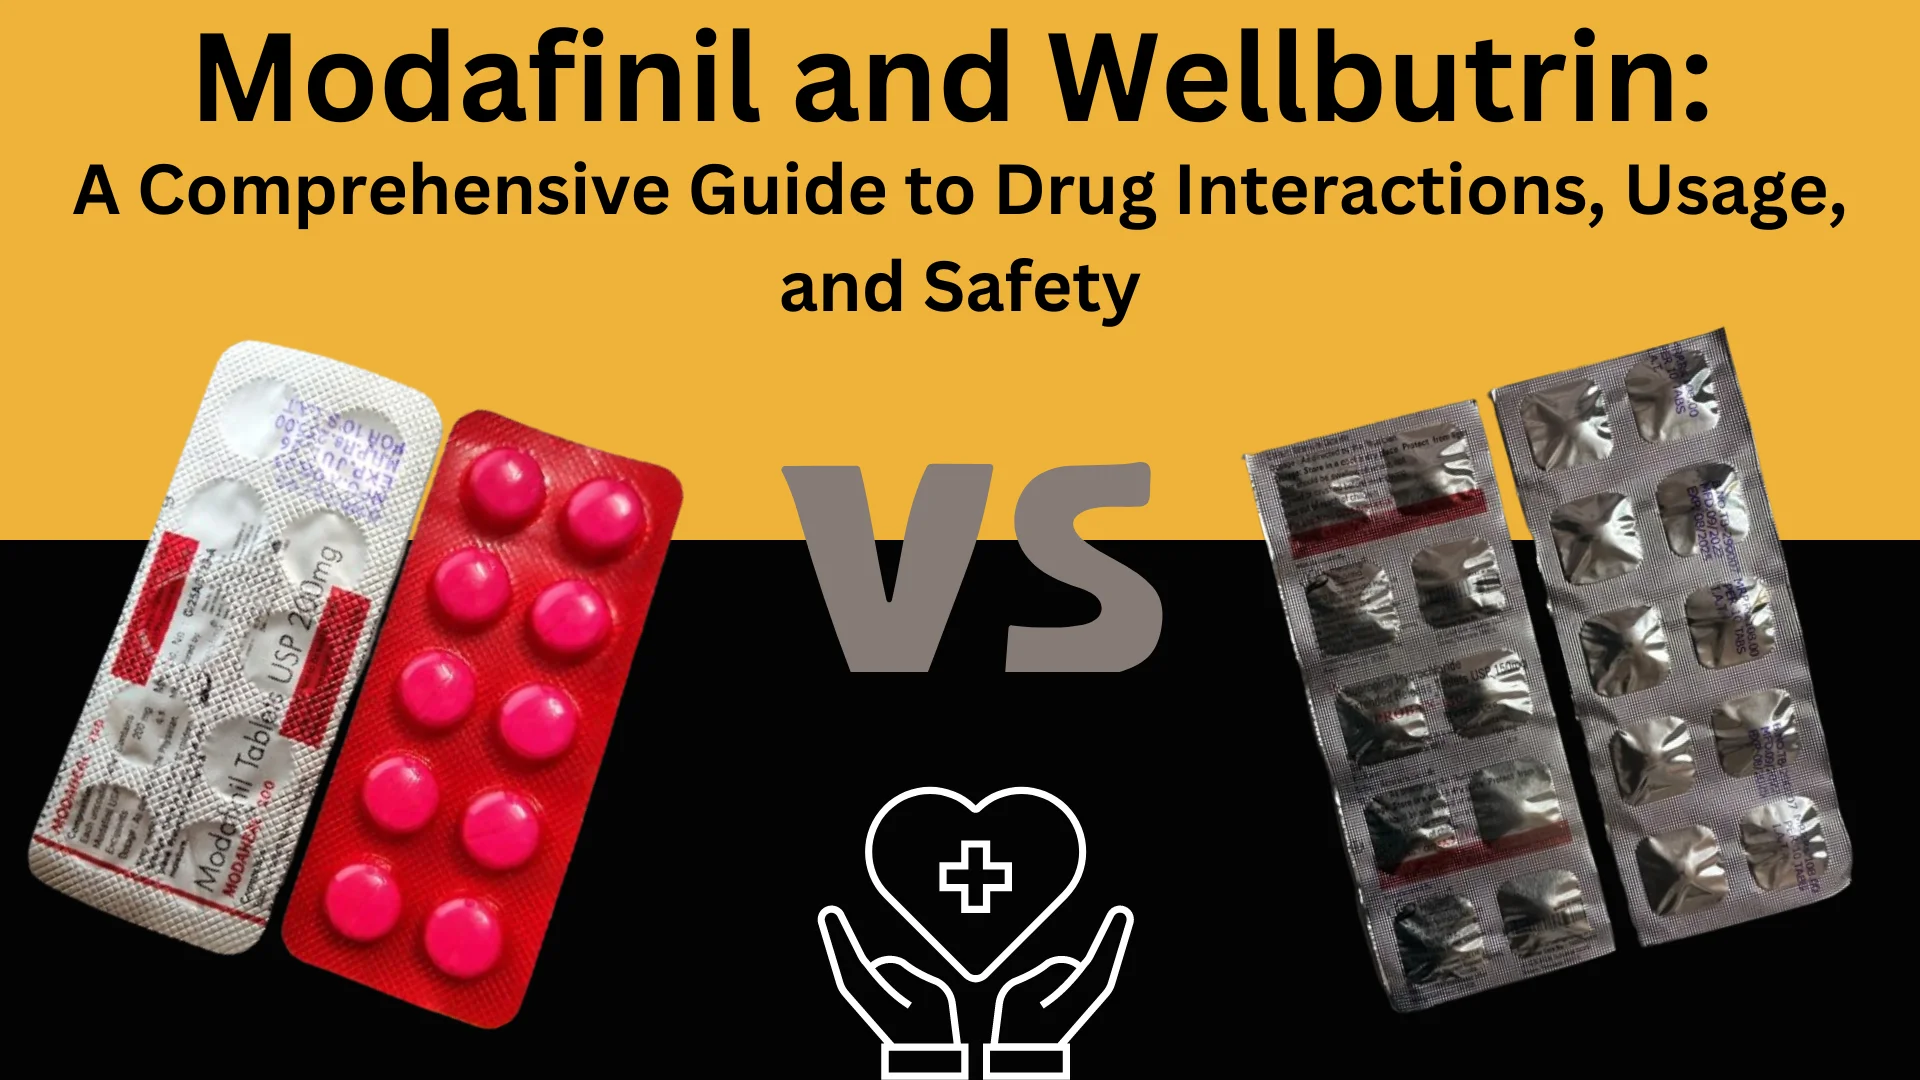 Modafinil and Wellbutrin Intercations - Benefits, Side Effects, Where to Buy